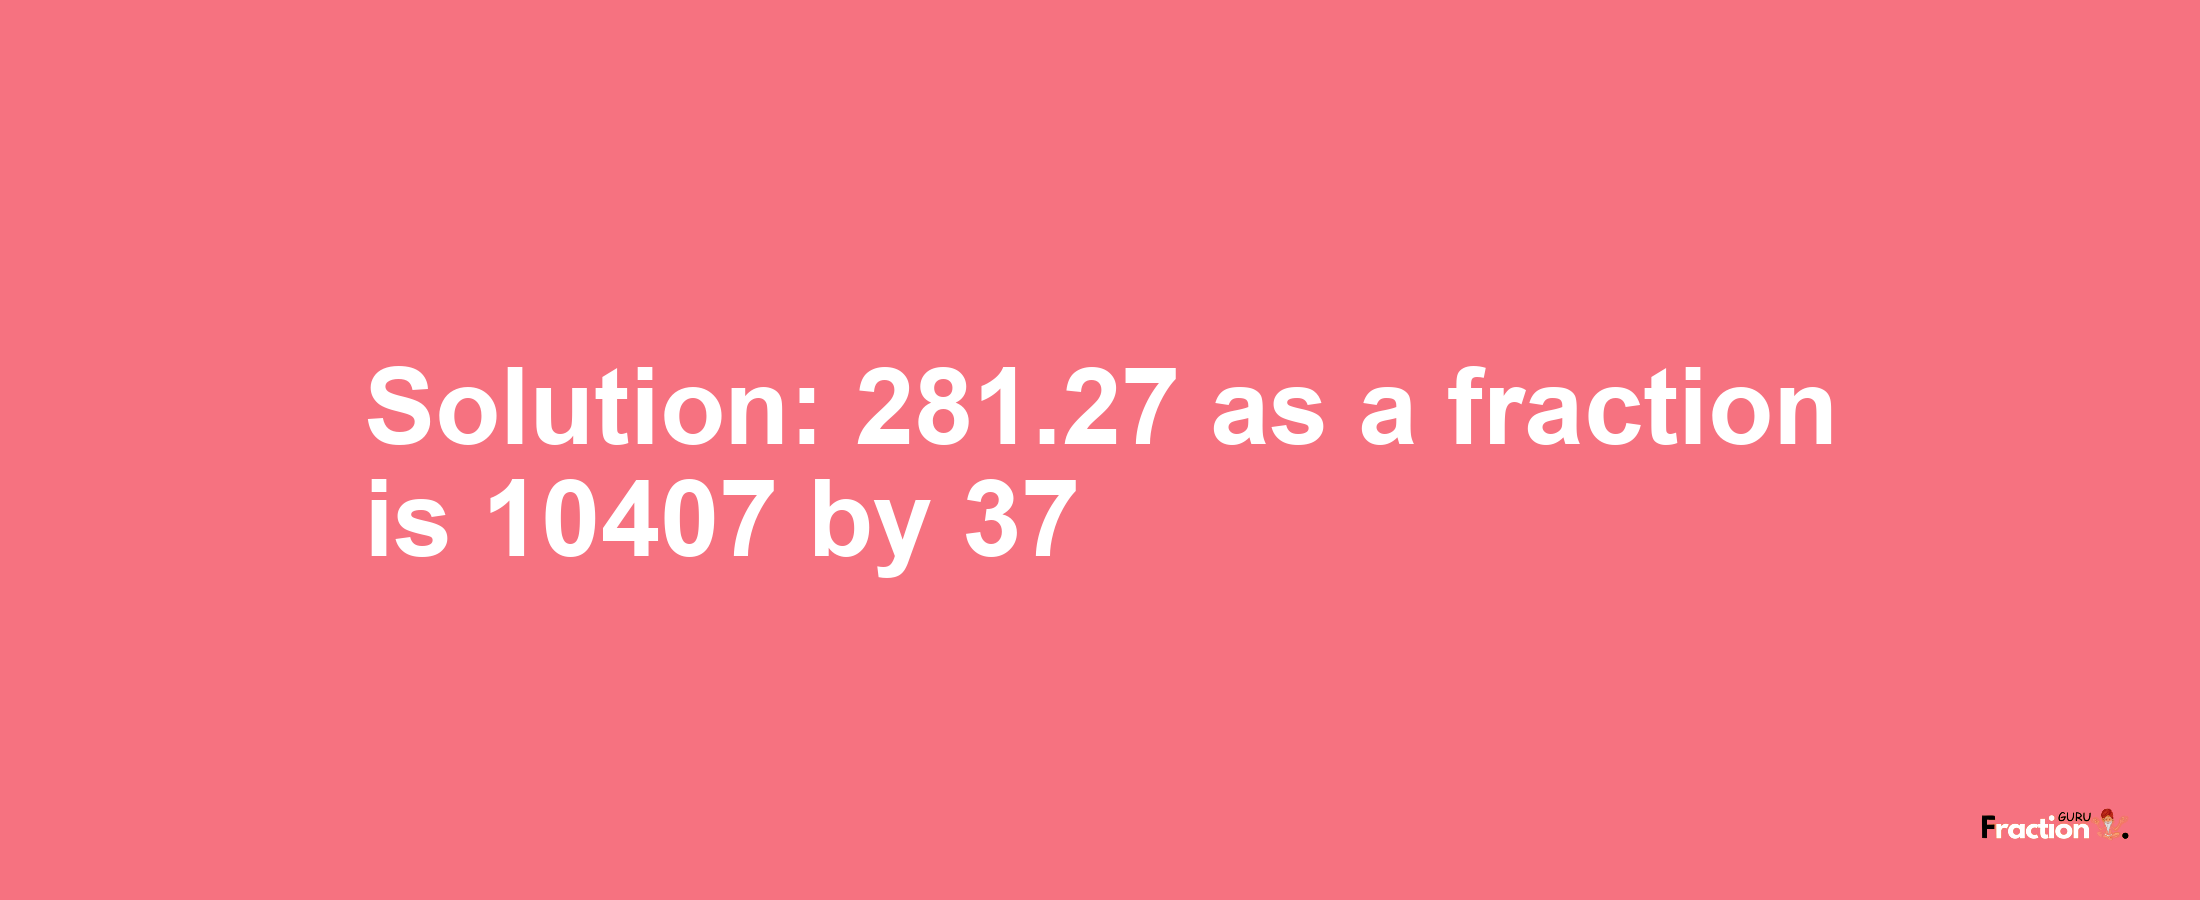 Solution:281.27 as a fraction is 10407/37